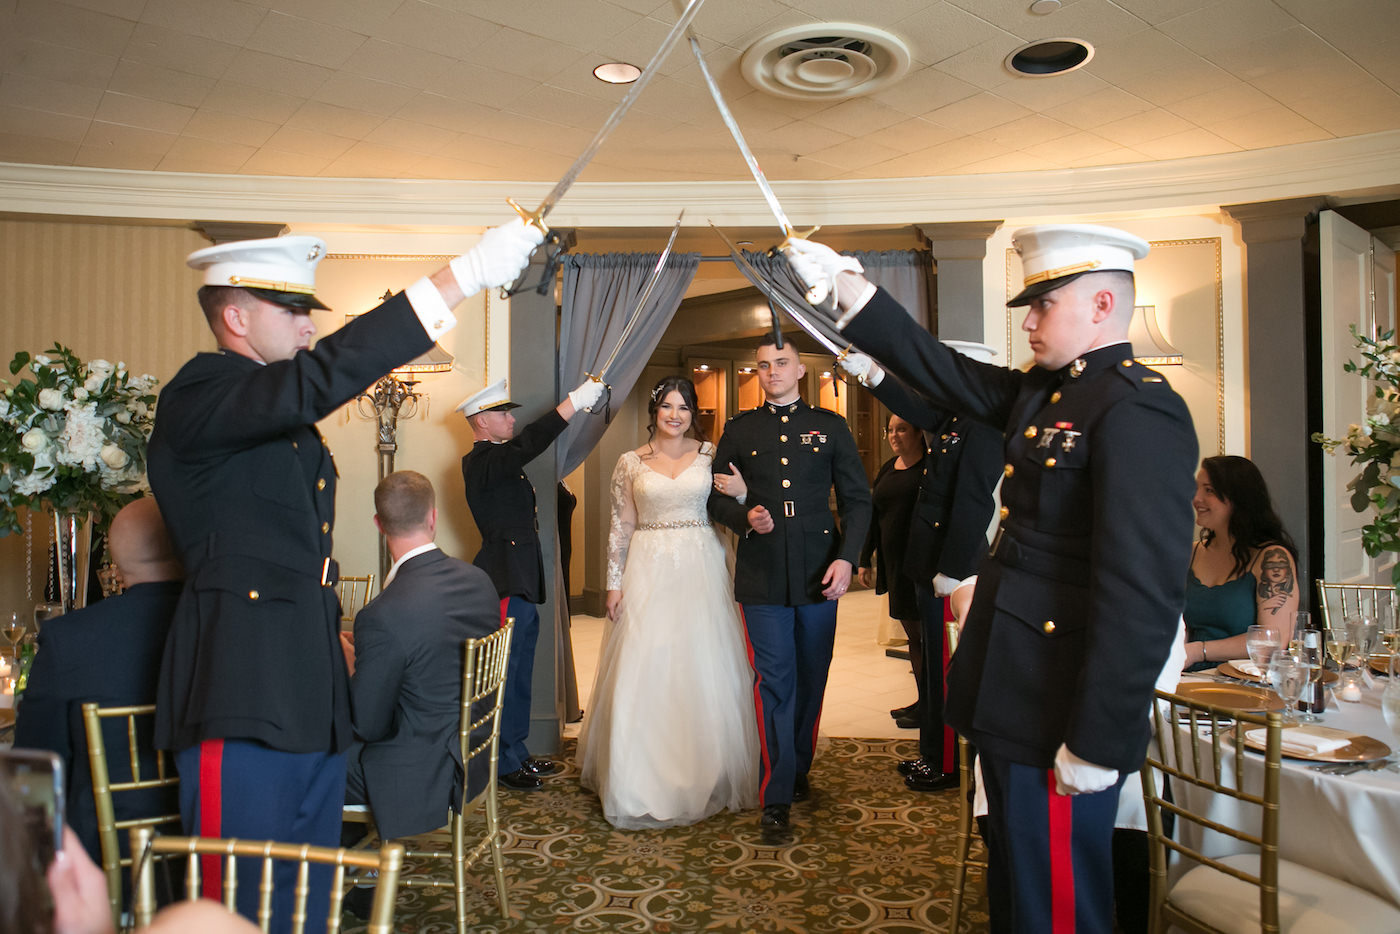 Classic Timeless Bride and Groom in Dress Blues Uniform Entering Wedding Reception Under Military Sword Arch | Wedding Photographer Carrie Wildes Photography | Ballroom Wedding Venue The Tampa Club